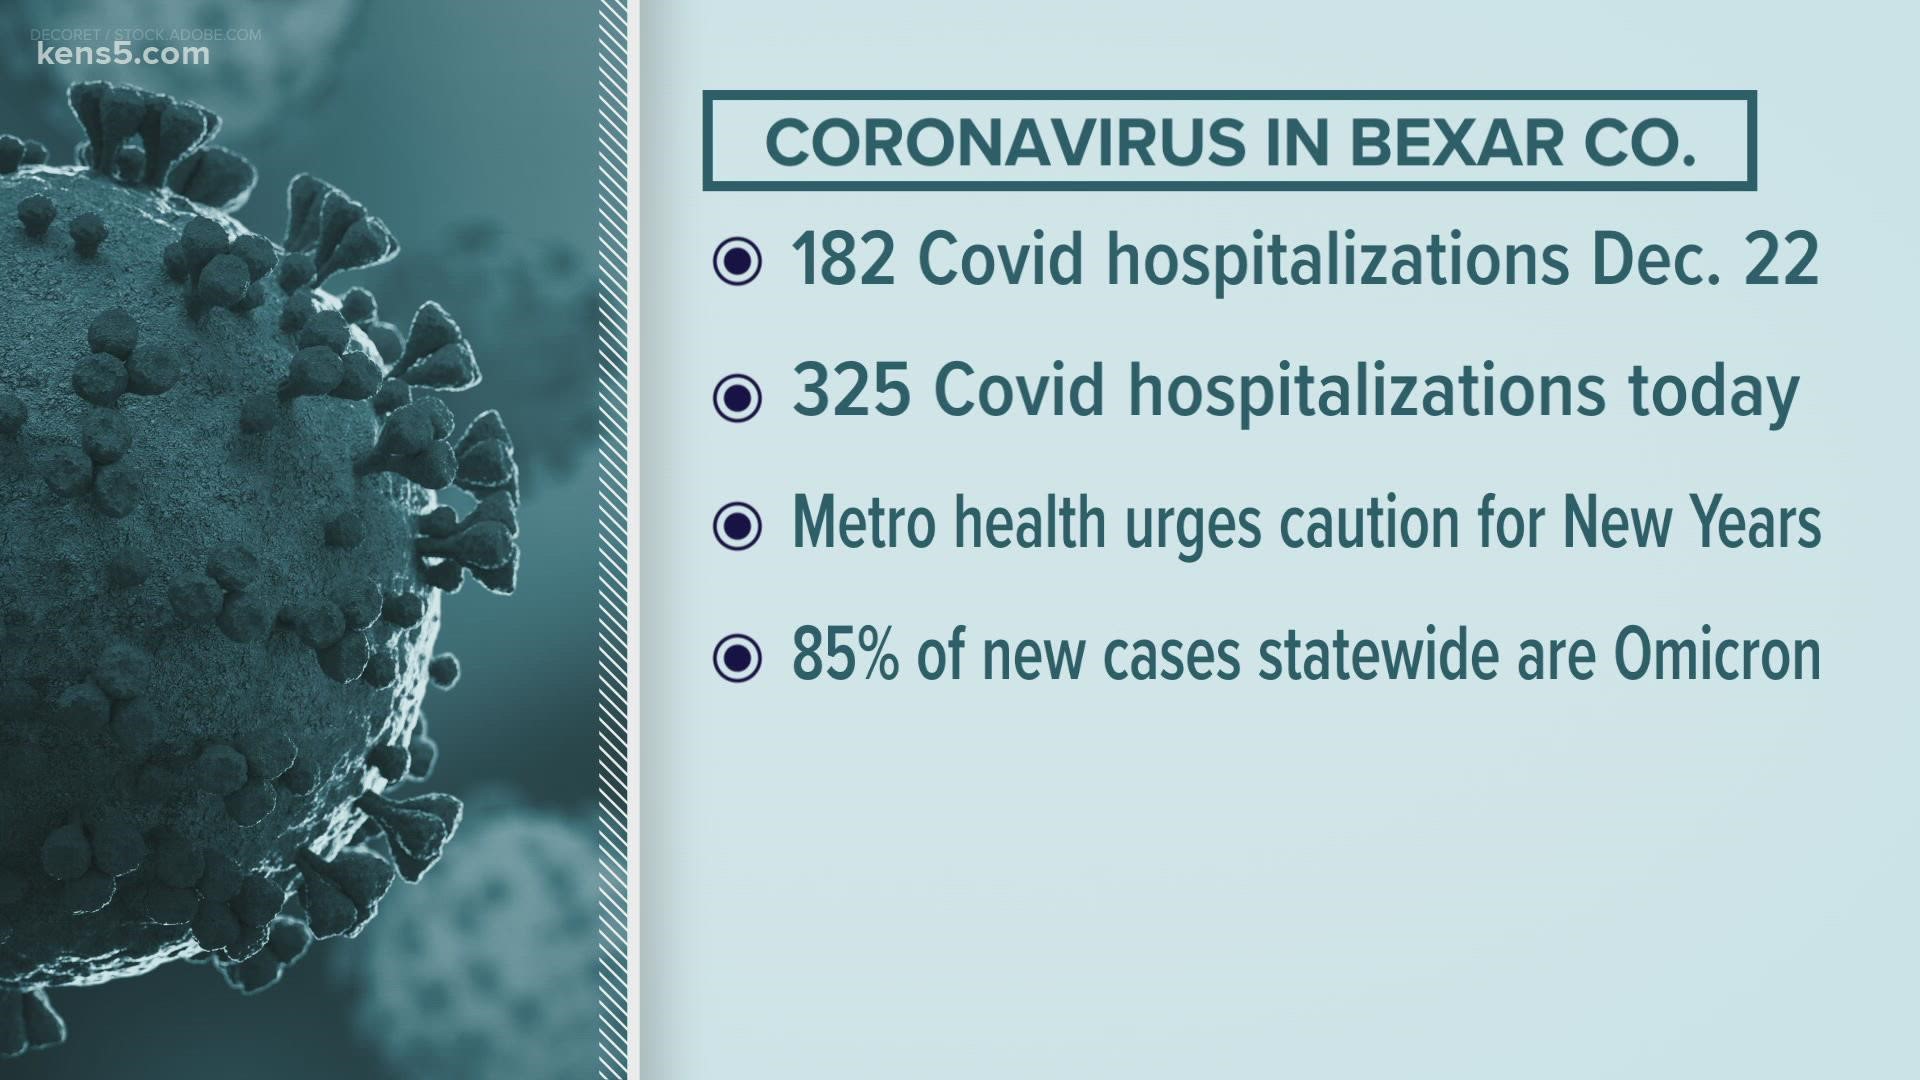 The omicron variant found its way to Bexar County in December, while daily totals of new COVID-19 diagnoses saw a drastic increase between holiday weekends.